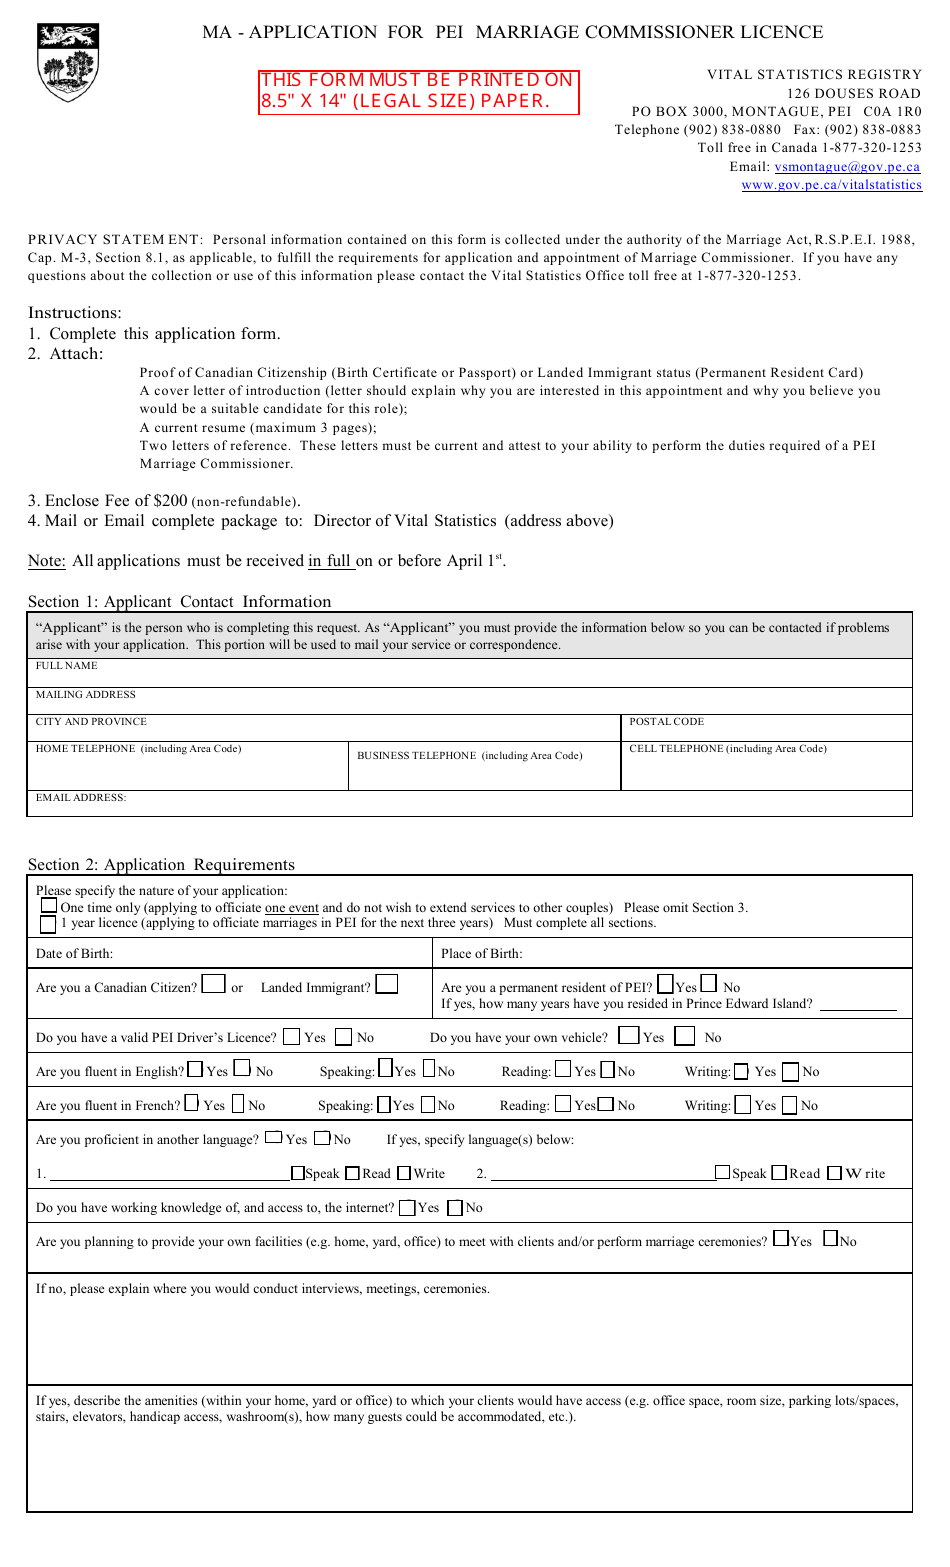 Application for Pei Marriage Commissioner Licence - Prince Edward Island, Canada, Page 1